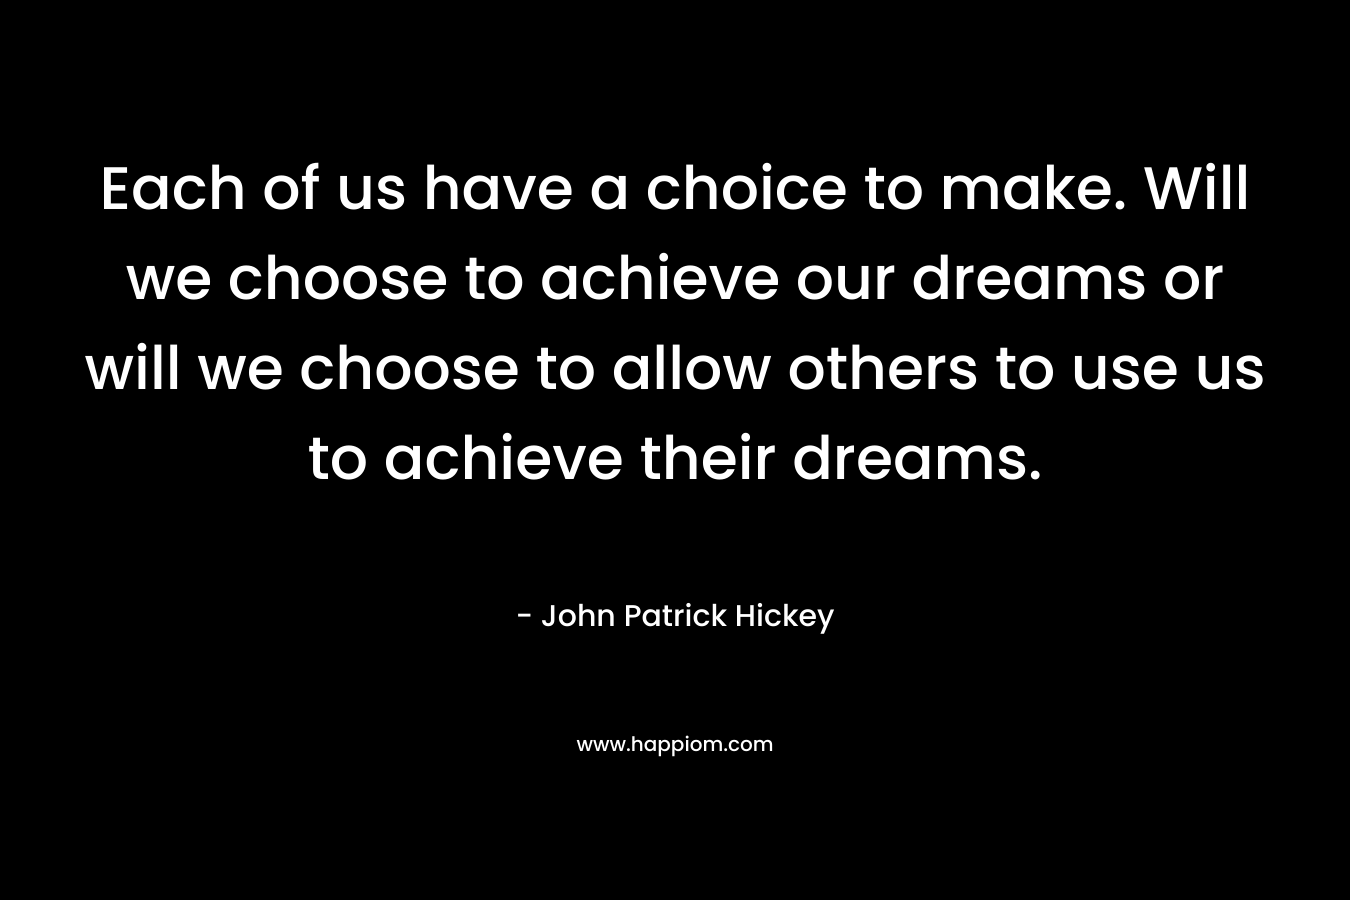 Each of us have a choice to make. Will we choose to achieve our dreams or will we choose to allow others to use us to achieve their dreams.